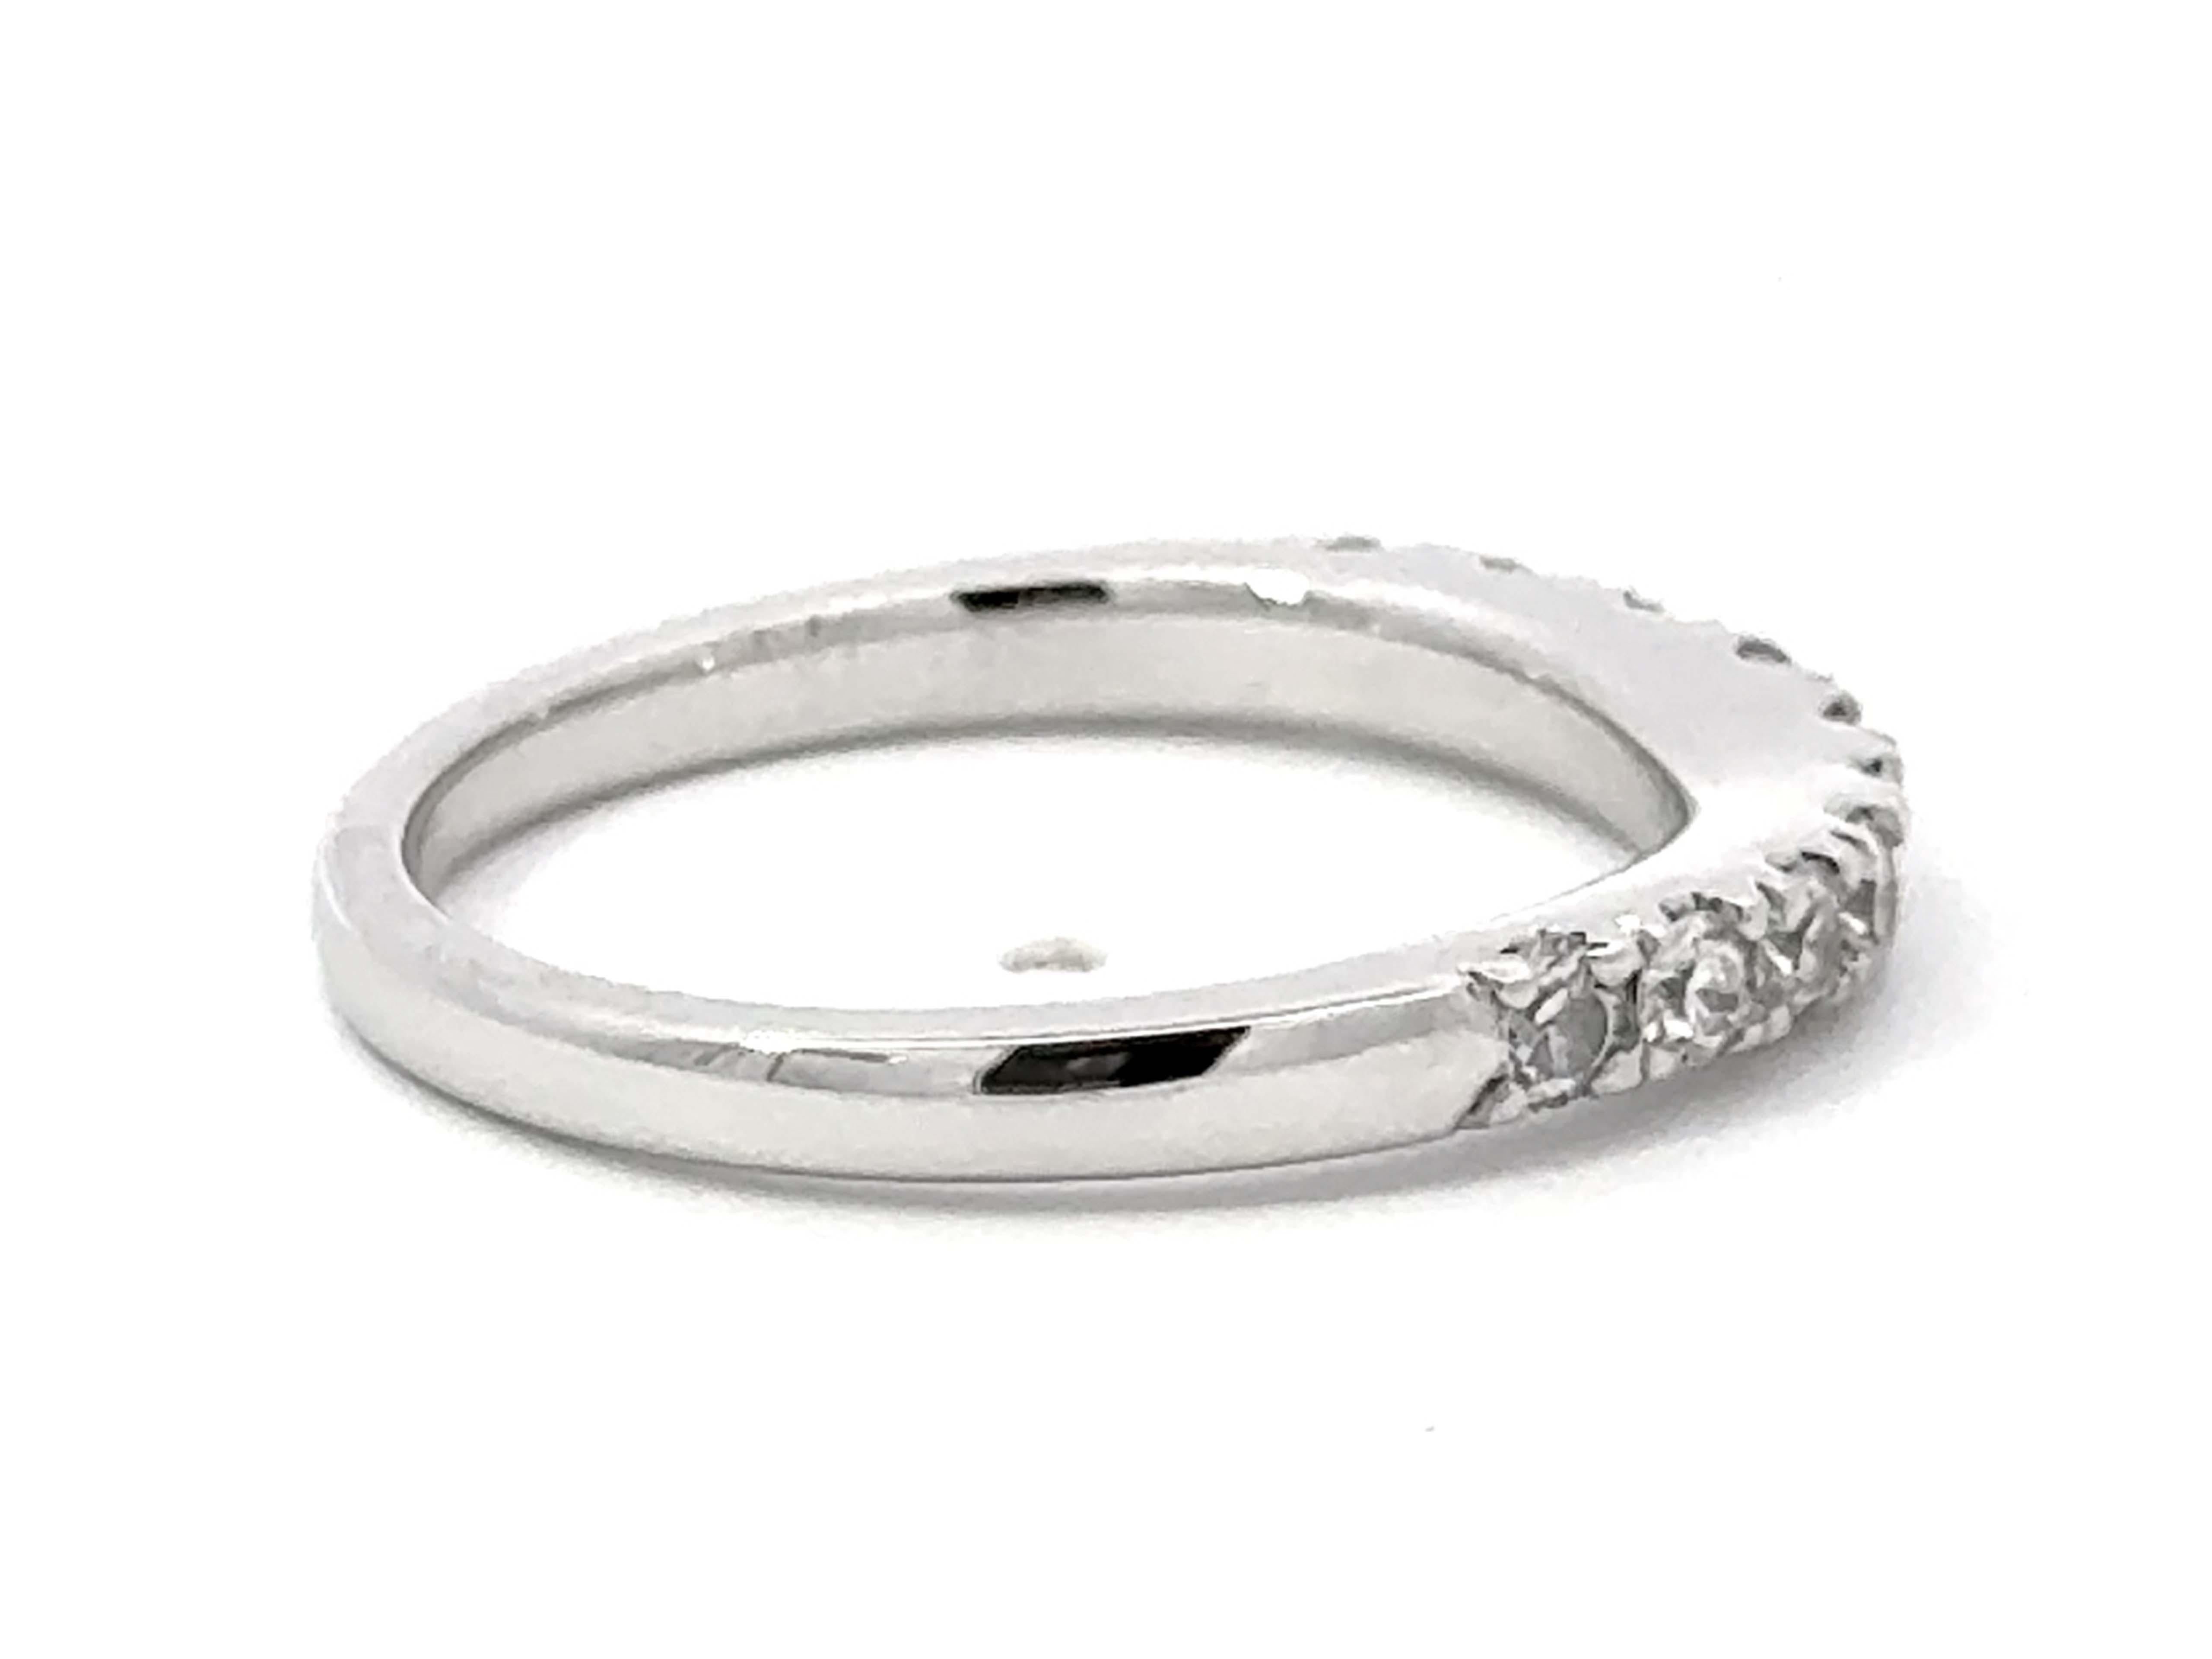 10 Round Celebrity Faceted Diamond Contour Band Ring 18k White Gold In Excellent Condition For Sale In Honolulu, HI